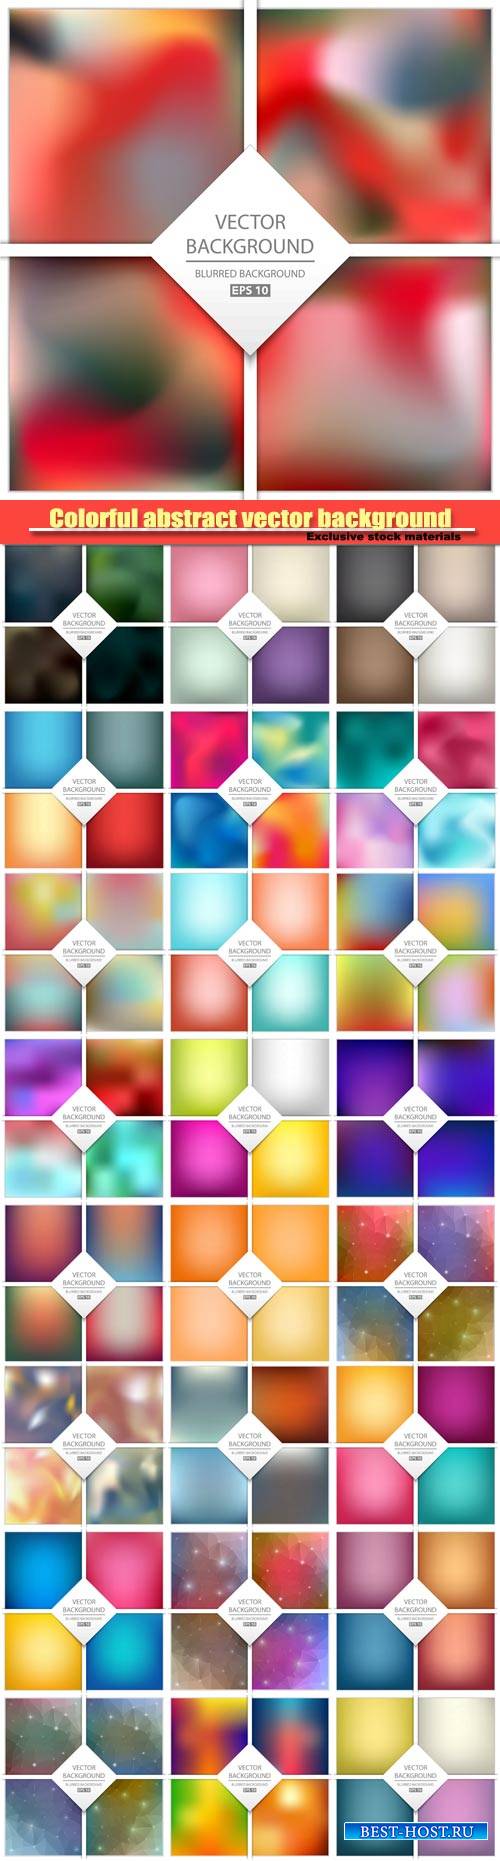 Multicolored abstract vector background, art illustration template design